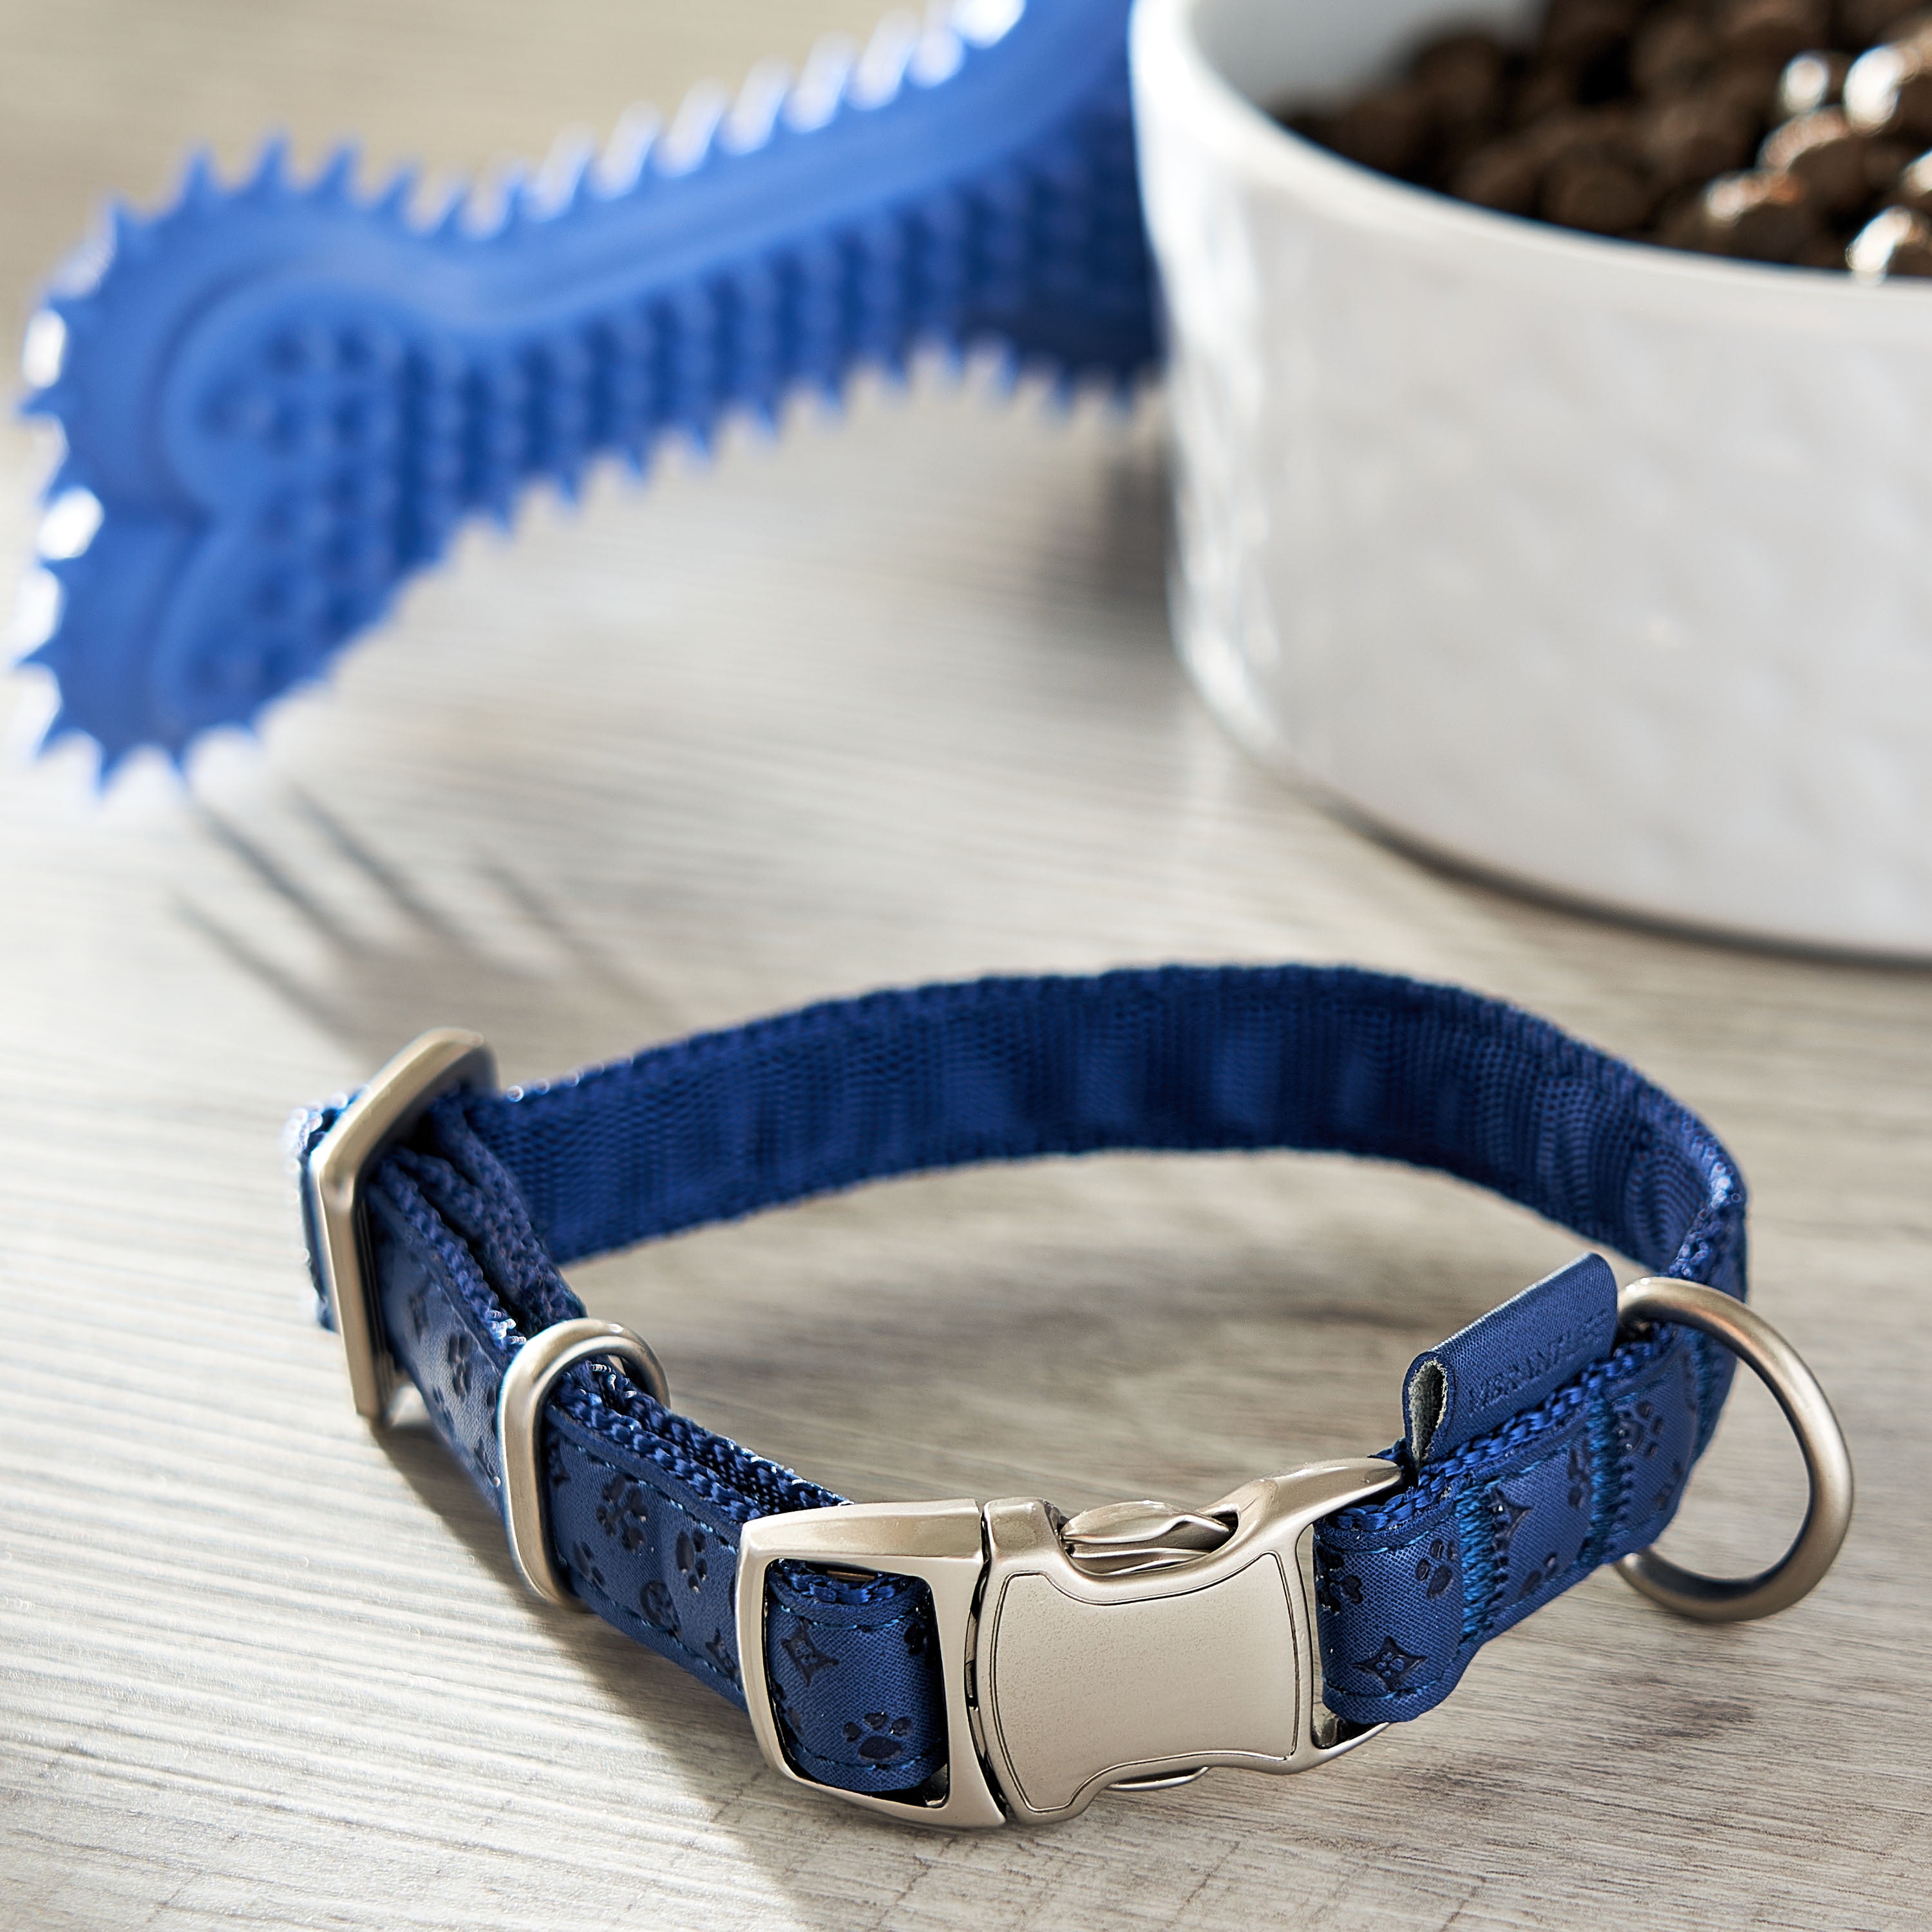 Brushed leather pet collar